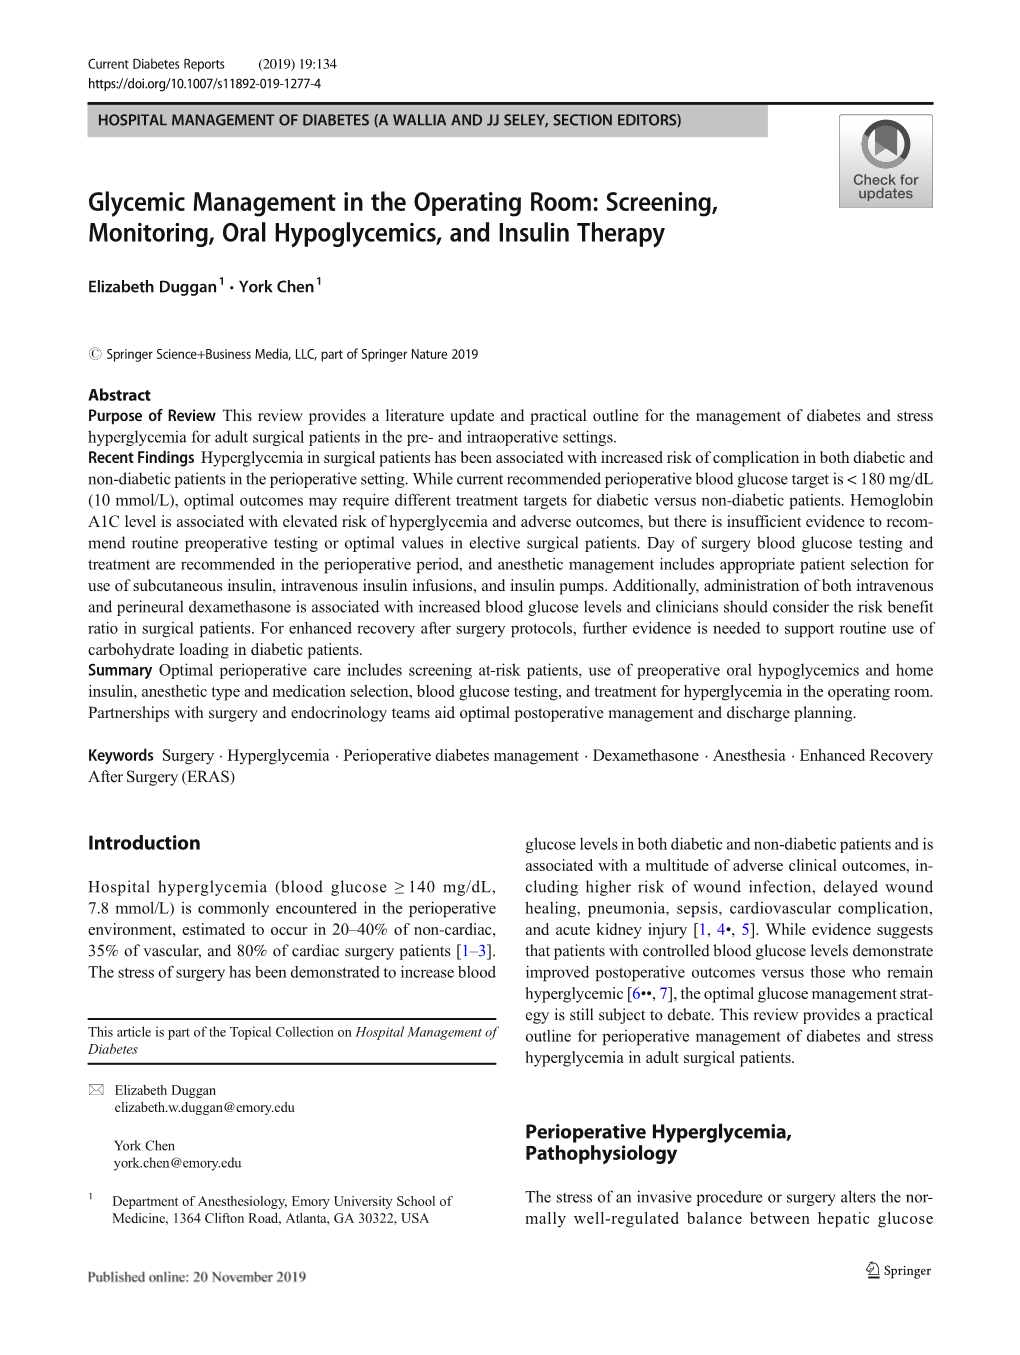 Glycemic Management in the Operating Room: Screening, Monitoring, Oral Hypoglycemics, and Insulin Therapy